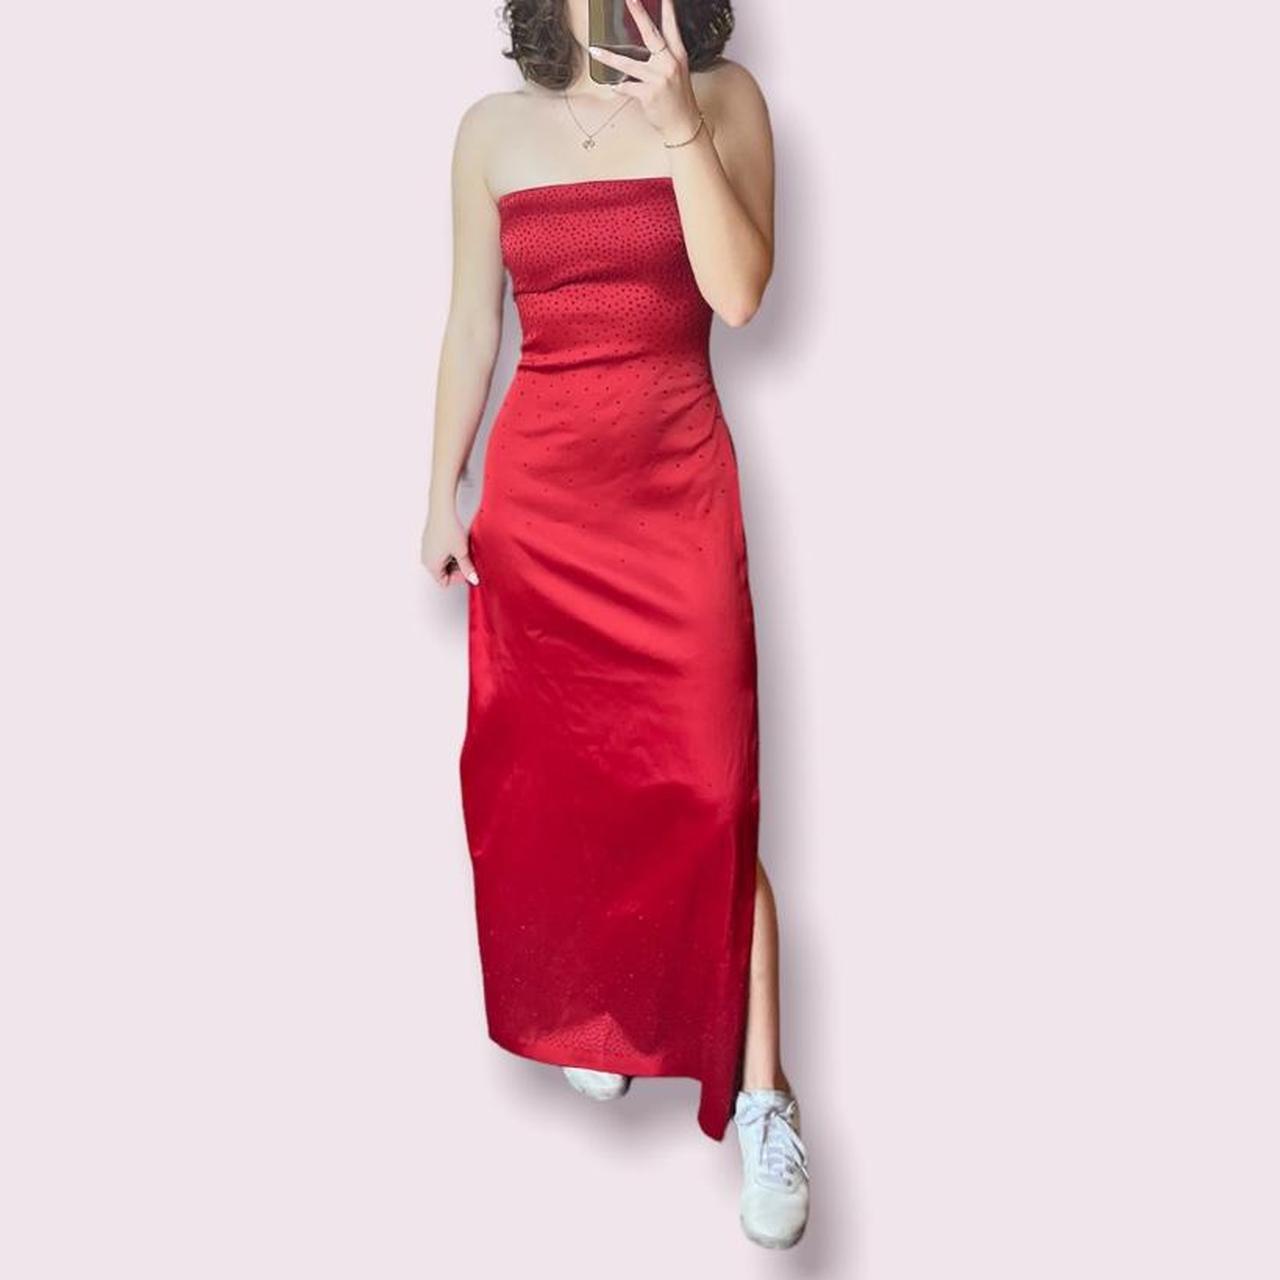 Product Image 1 - Red strapless prom dress. This